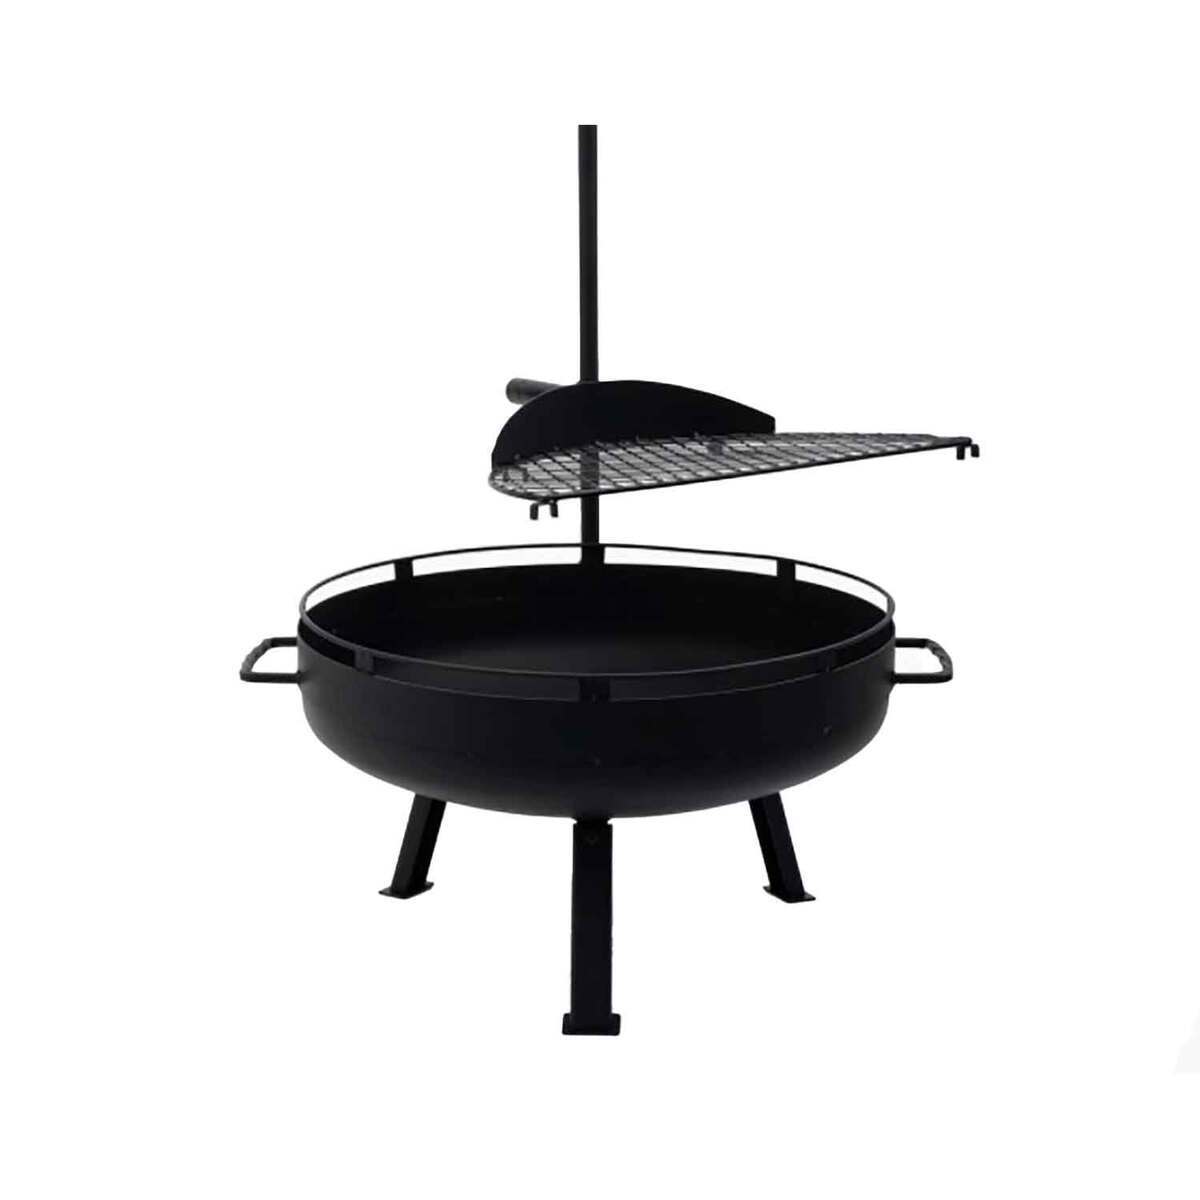 UCO Gear Mini Flatpack Grill & Firepit Review - Campfire Guy